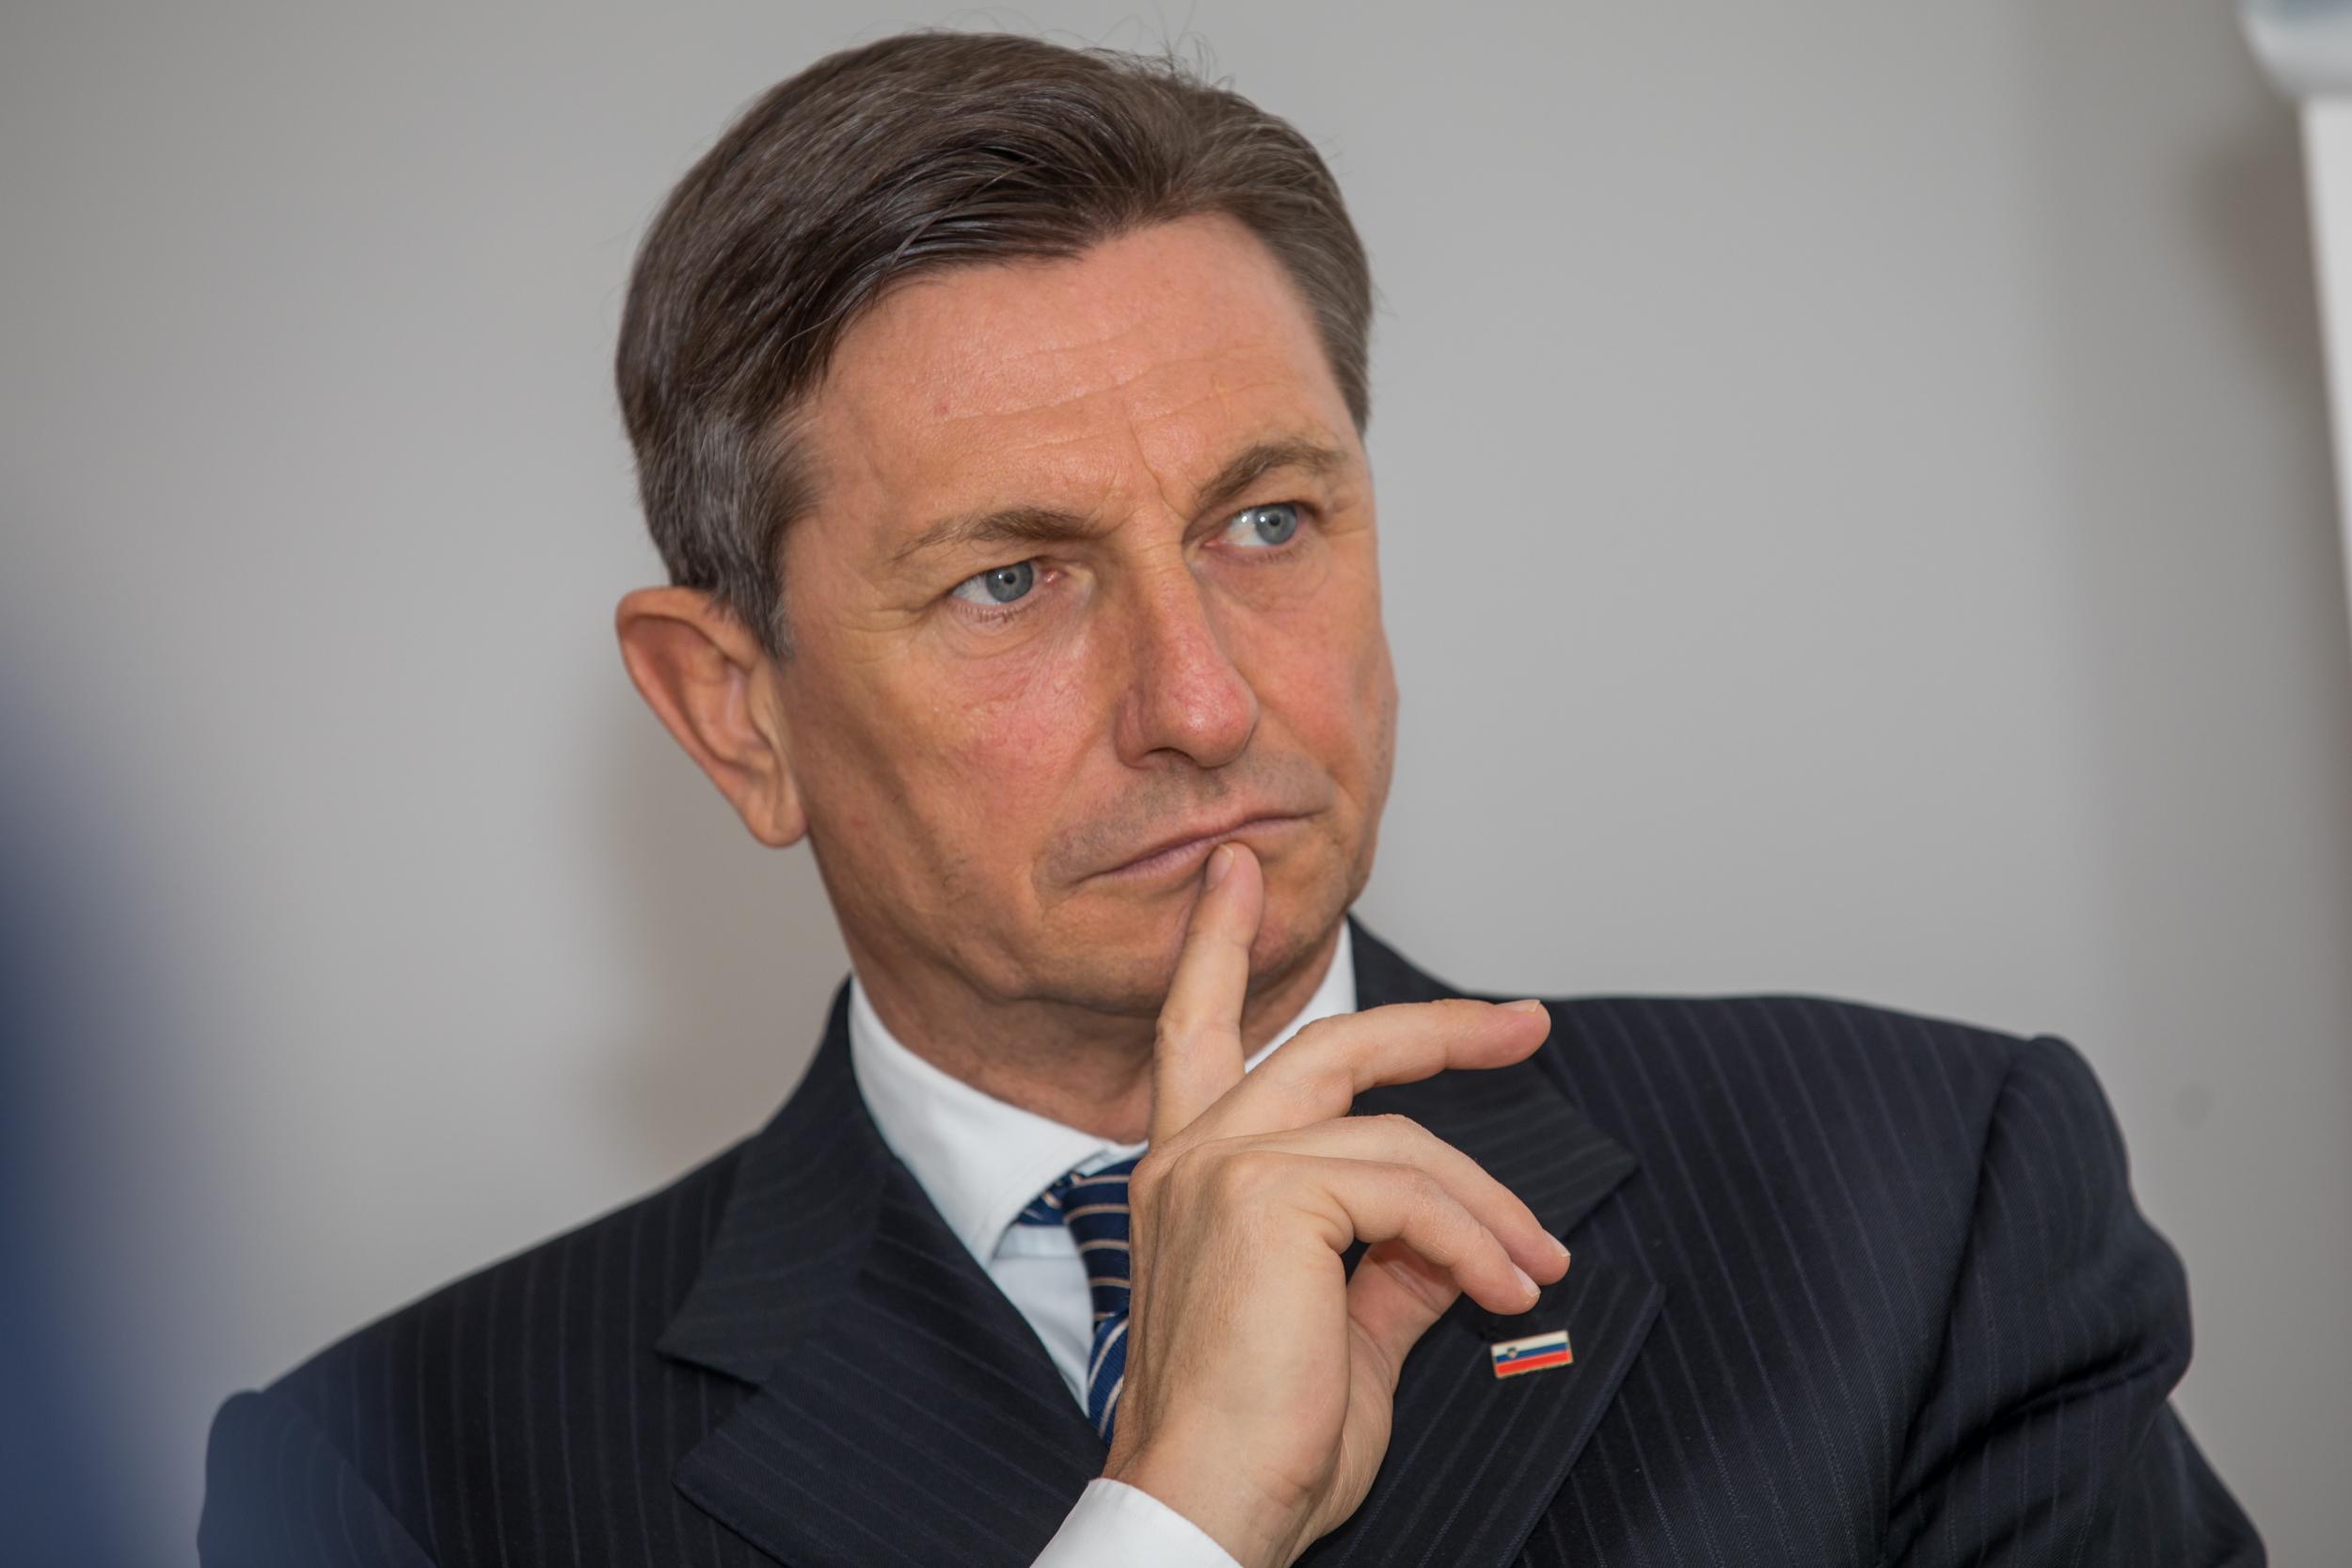 From the office of the President of Slovenia for "Avaz": Pahor is against the idea of the disintegration of B&H